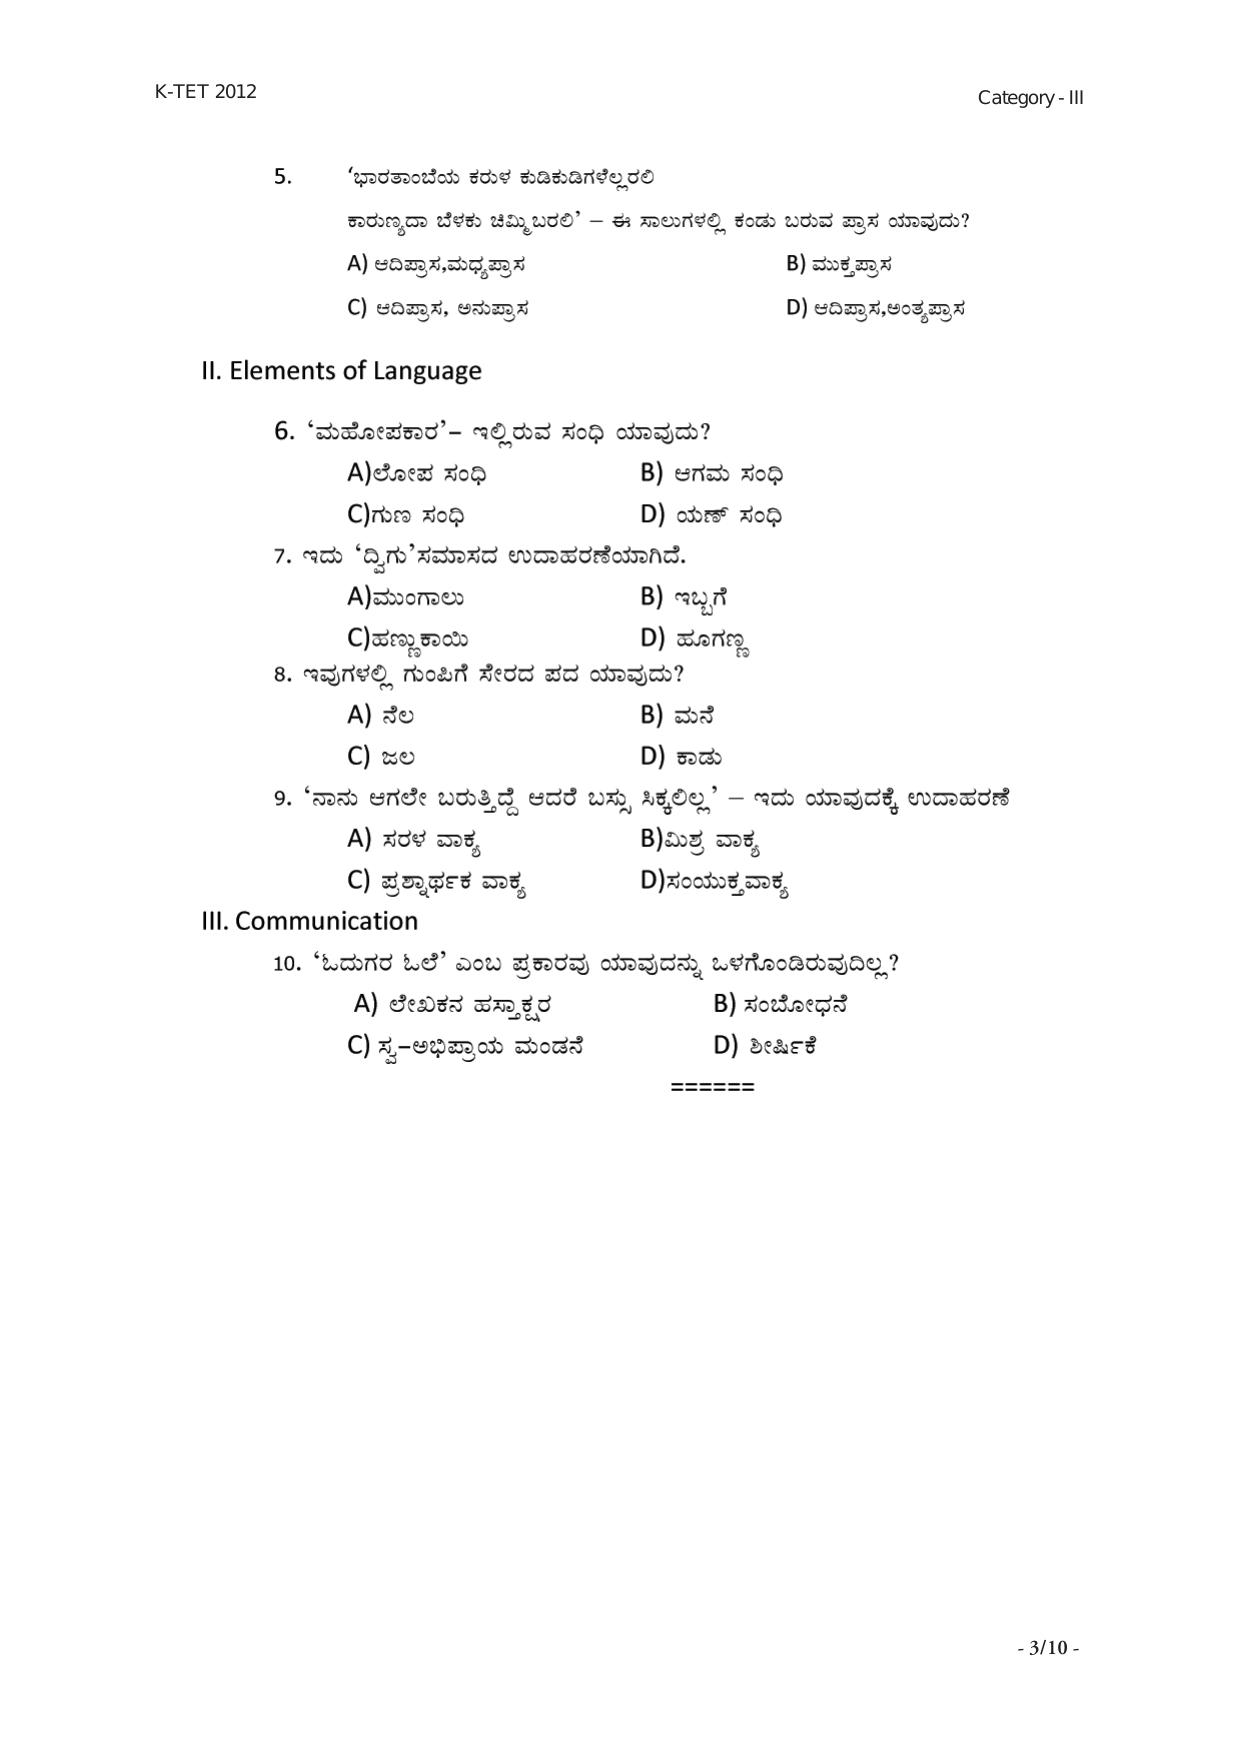 KTET Category III High School Teacher (8 to 10) Exam Previous Papers - Page 10